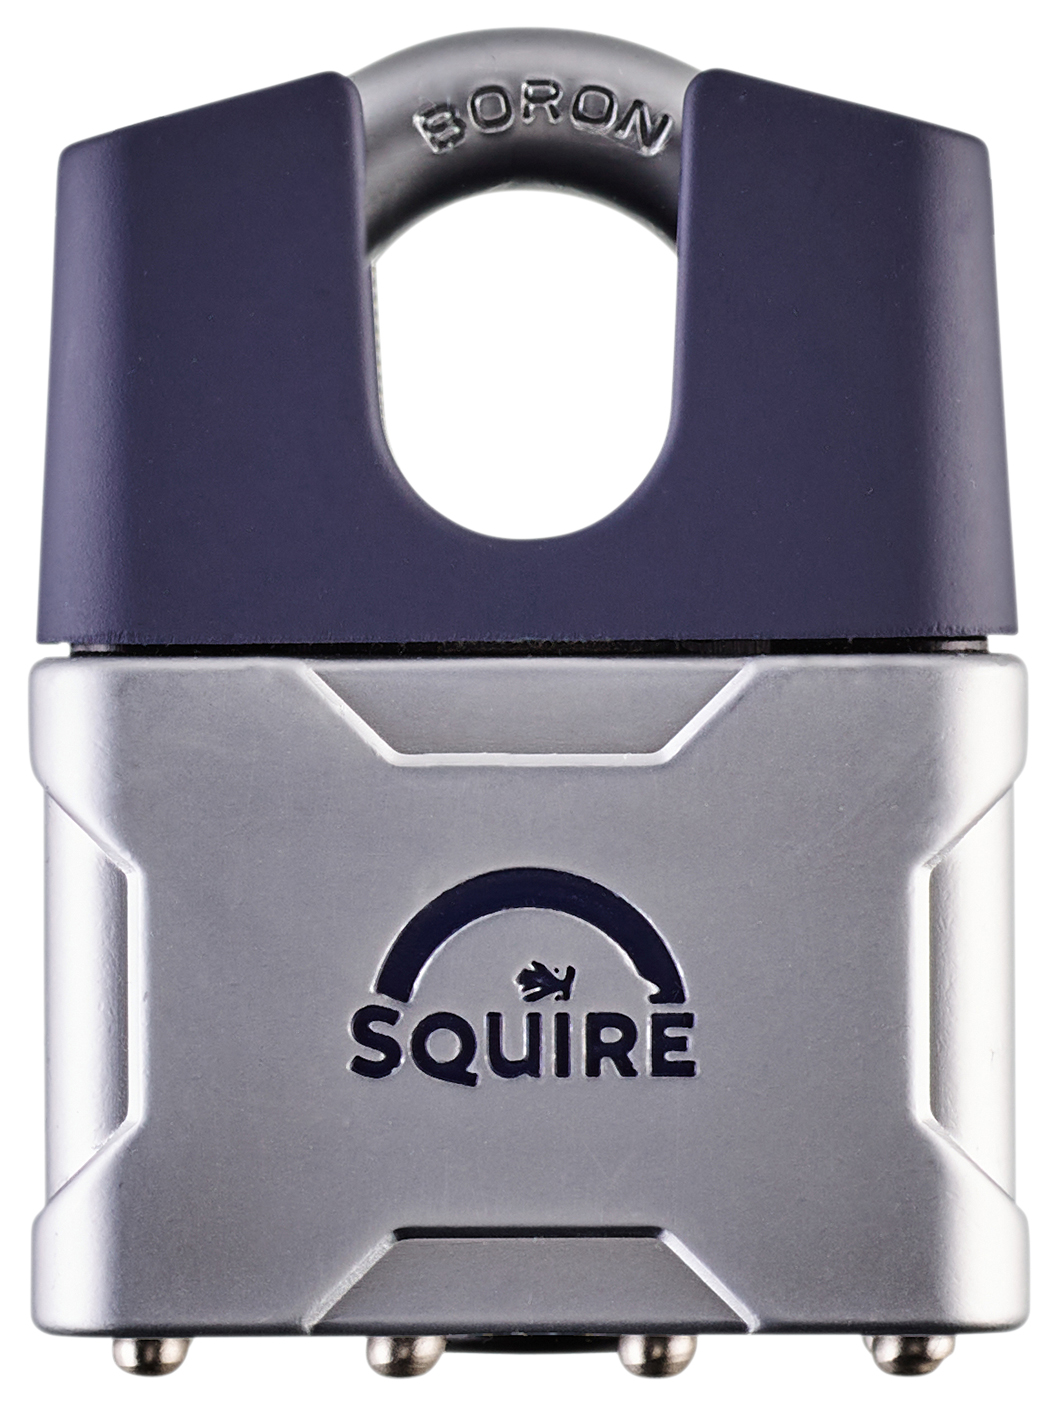 Squire Die Cast Body Cover with Closed Boron Shackle Padlock - 50mm